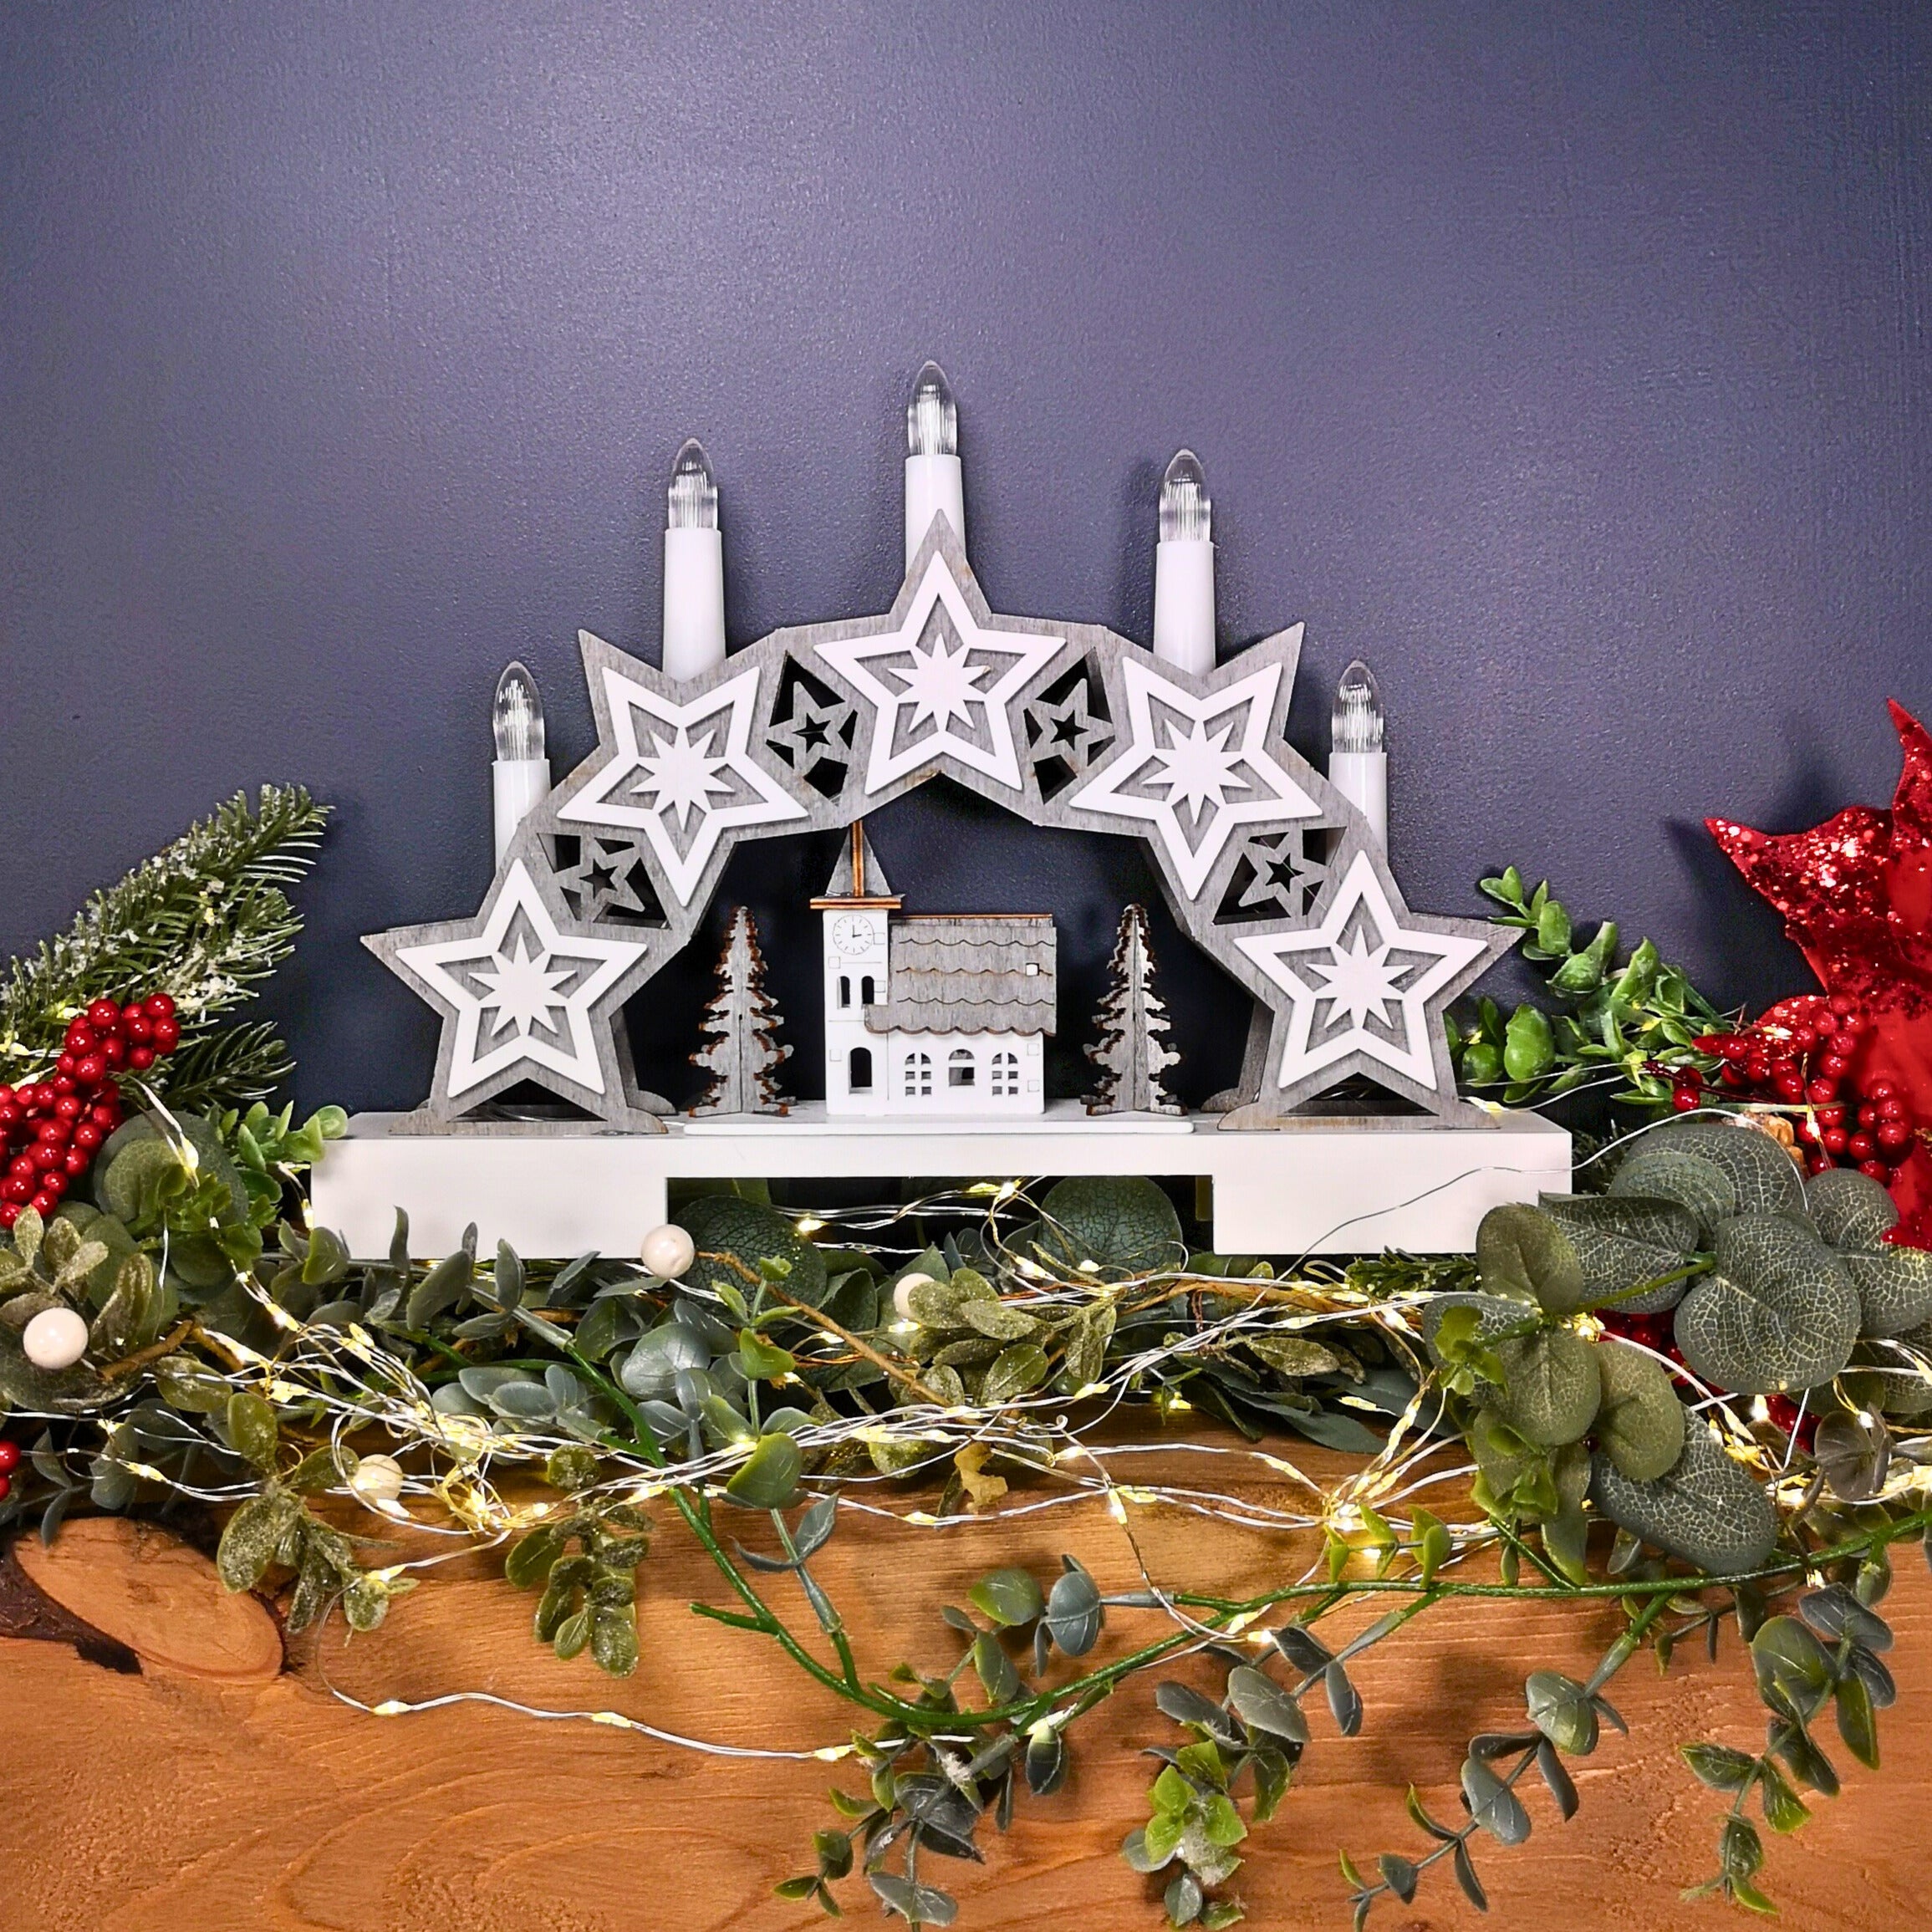 32cm Battery Operated Star and Village Candle Bridge Christmas Decoration